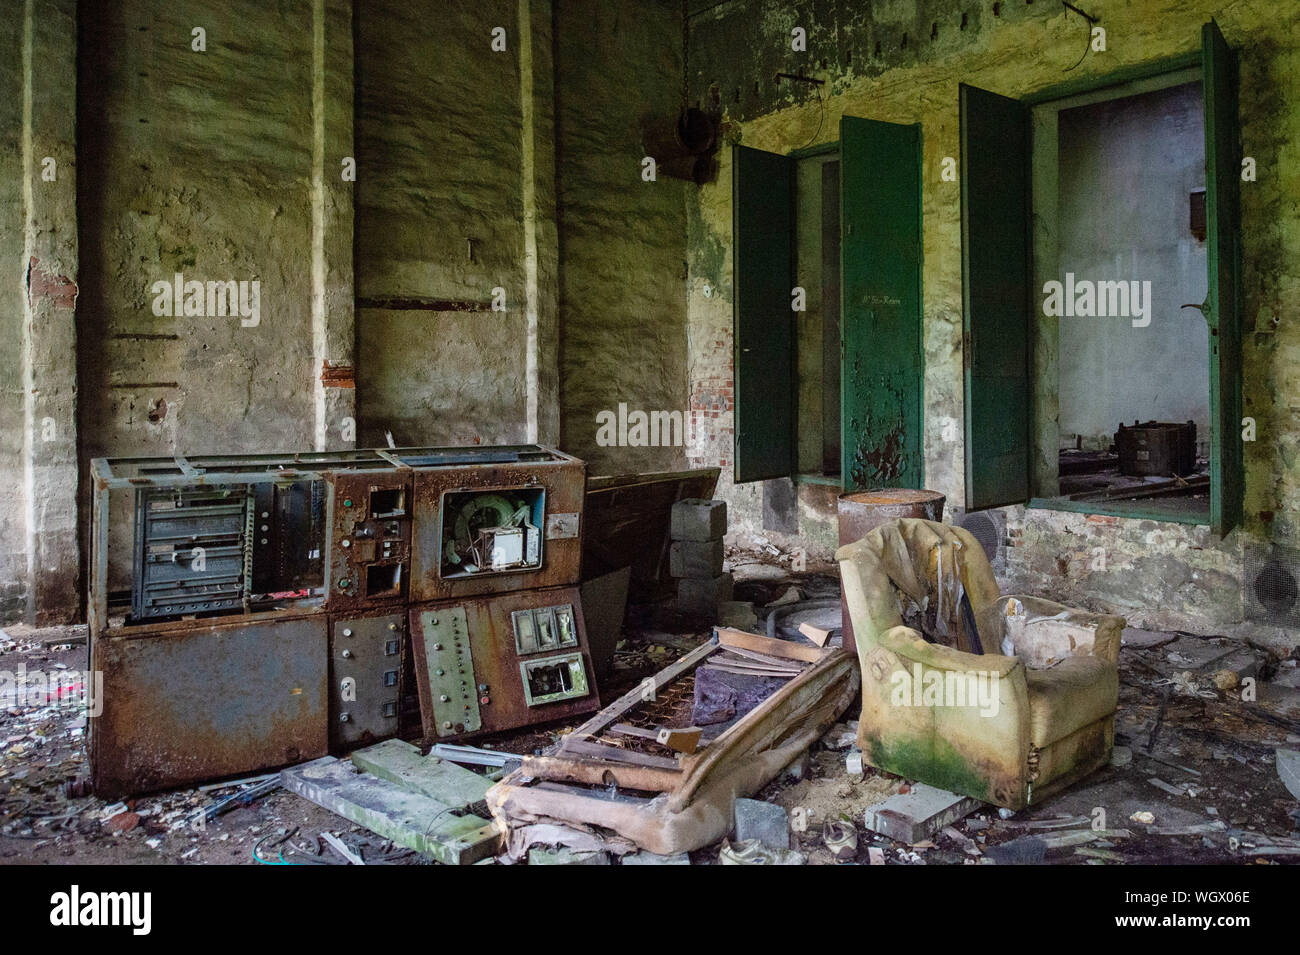 https://c8.alamy.com/comp/WGX06E/30-august-2019-saxony-anhalt-tangerhtte-an-old-control-panel-and-a-rotten-armchair-stand-in-a-building-of-the-former-tangerhtte-ironworks-when-the-plant-was-first-cast-in-1844-the-town-of-tangerhtte-was-still-called-vaethen-it-was-not-until-1928-that-vaethen-was-renamed-tangerhtte-after-the-hut-that-was-situated-on-the-tangier-river-today-the-site-of-the-ironworks-is-a-ruin-which-can-only-be-entered-with-a-permit-however-on-the-day-of-the-monument-8-september-2019-the-new-palace-built-by-the-family-of-factory-owners-not-far-from-the-ironworks-can-be-visited-photo-klaus-di-WGX06E.jpg